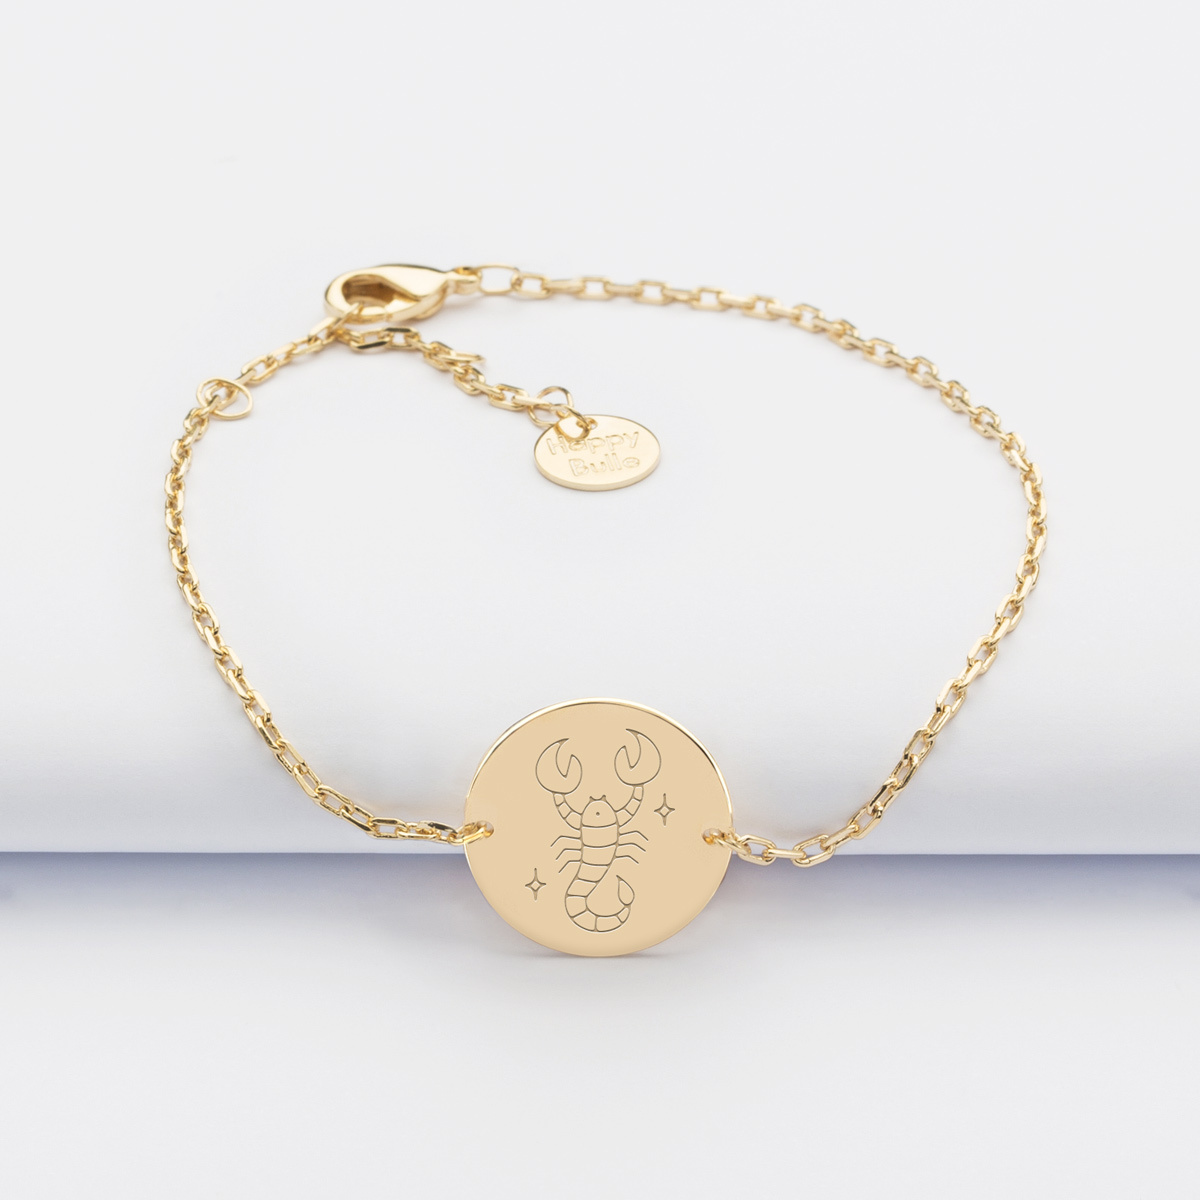 Personalised engraved gold plated medallion 2 holes chain bracelet 15mm – ‘Astro’ special edition